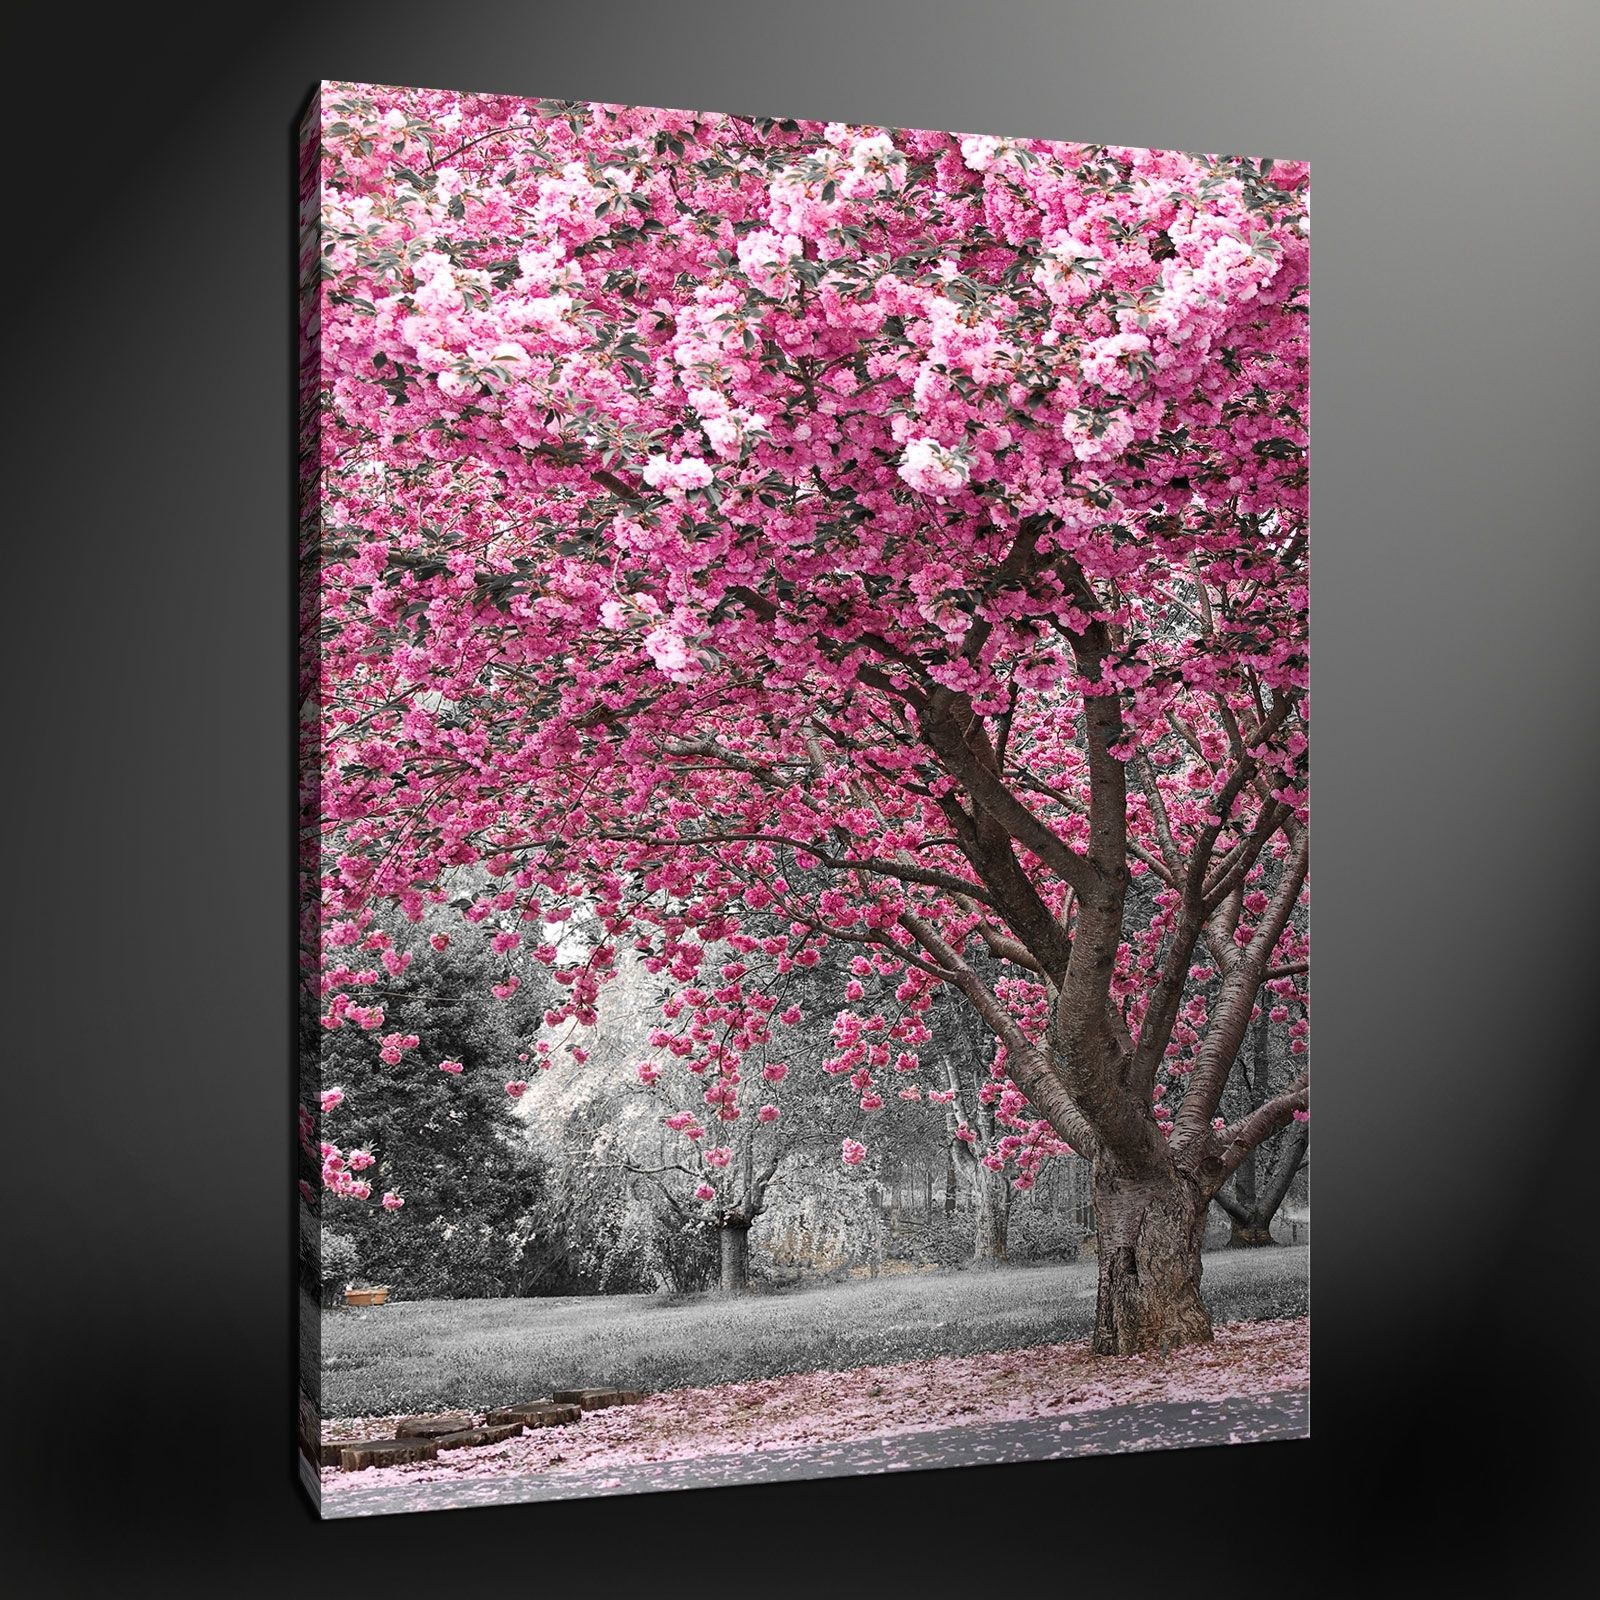 Wall Art Designs: Pink Wall Art Wonderful Pictures Beautiful Pink Inside Most Up To Date Pink And Grey Wall Art (View 7 of 15)